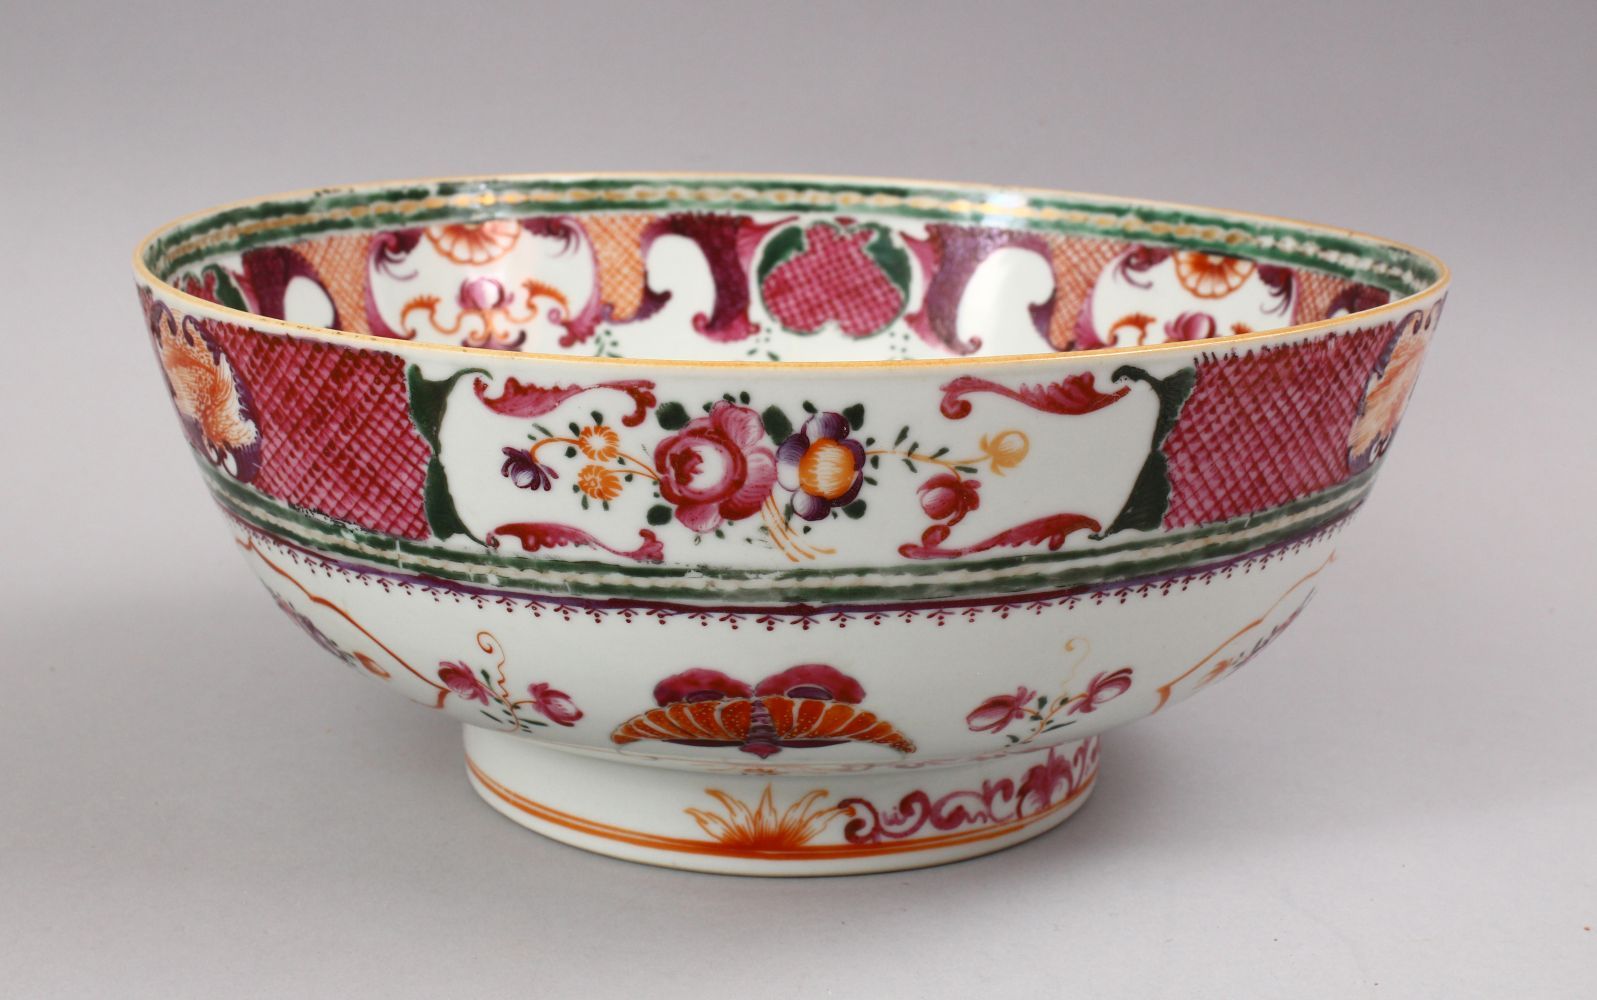 A GOOD 18TH CENTURY CHINESE QIANLONG MANDARIN PORCELAIN BOWL, decorated with scenes of flora and